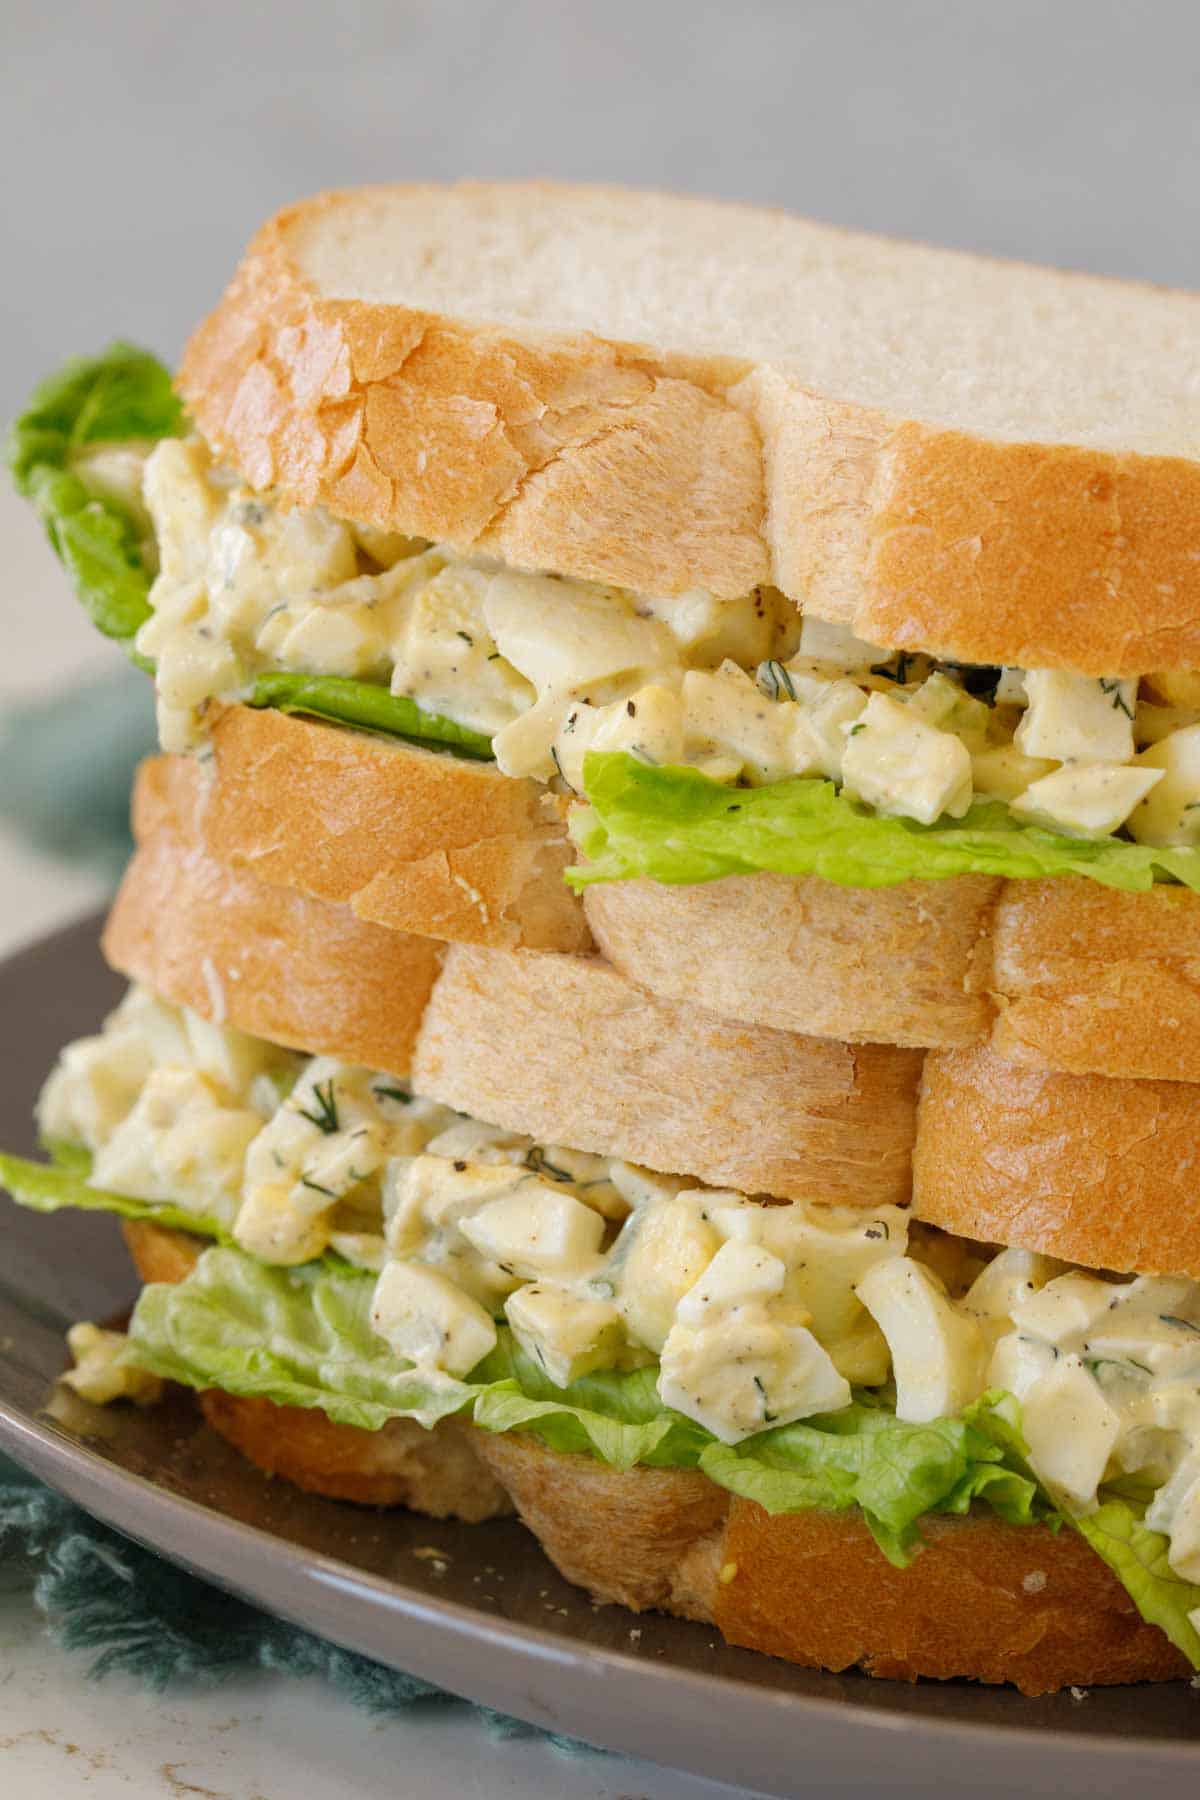 Egg sandwiches stacked on a serving plate.